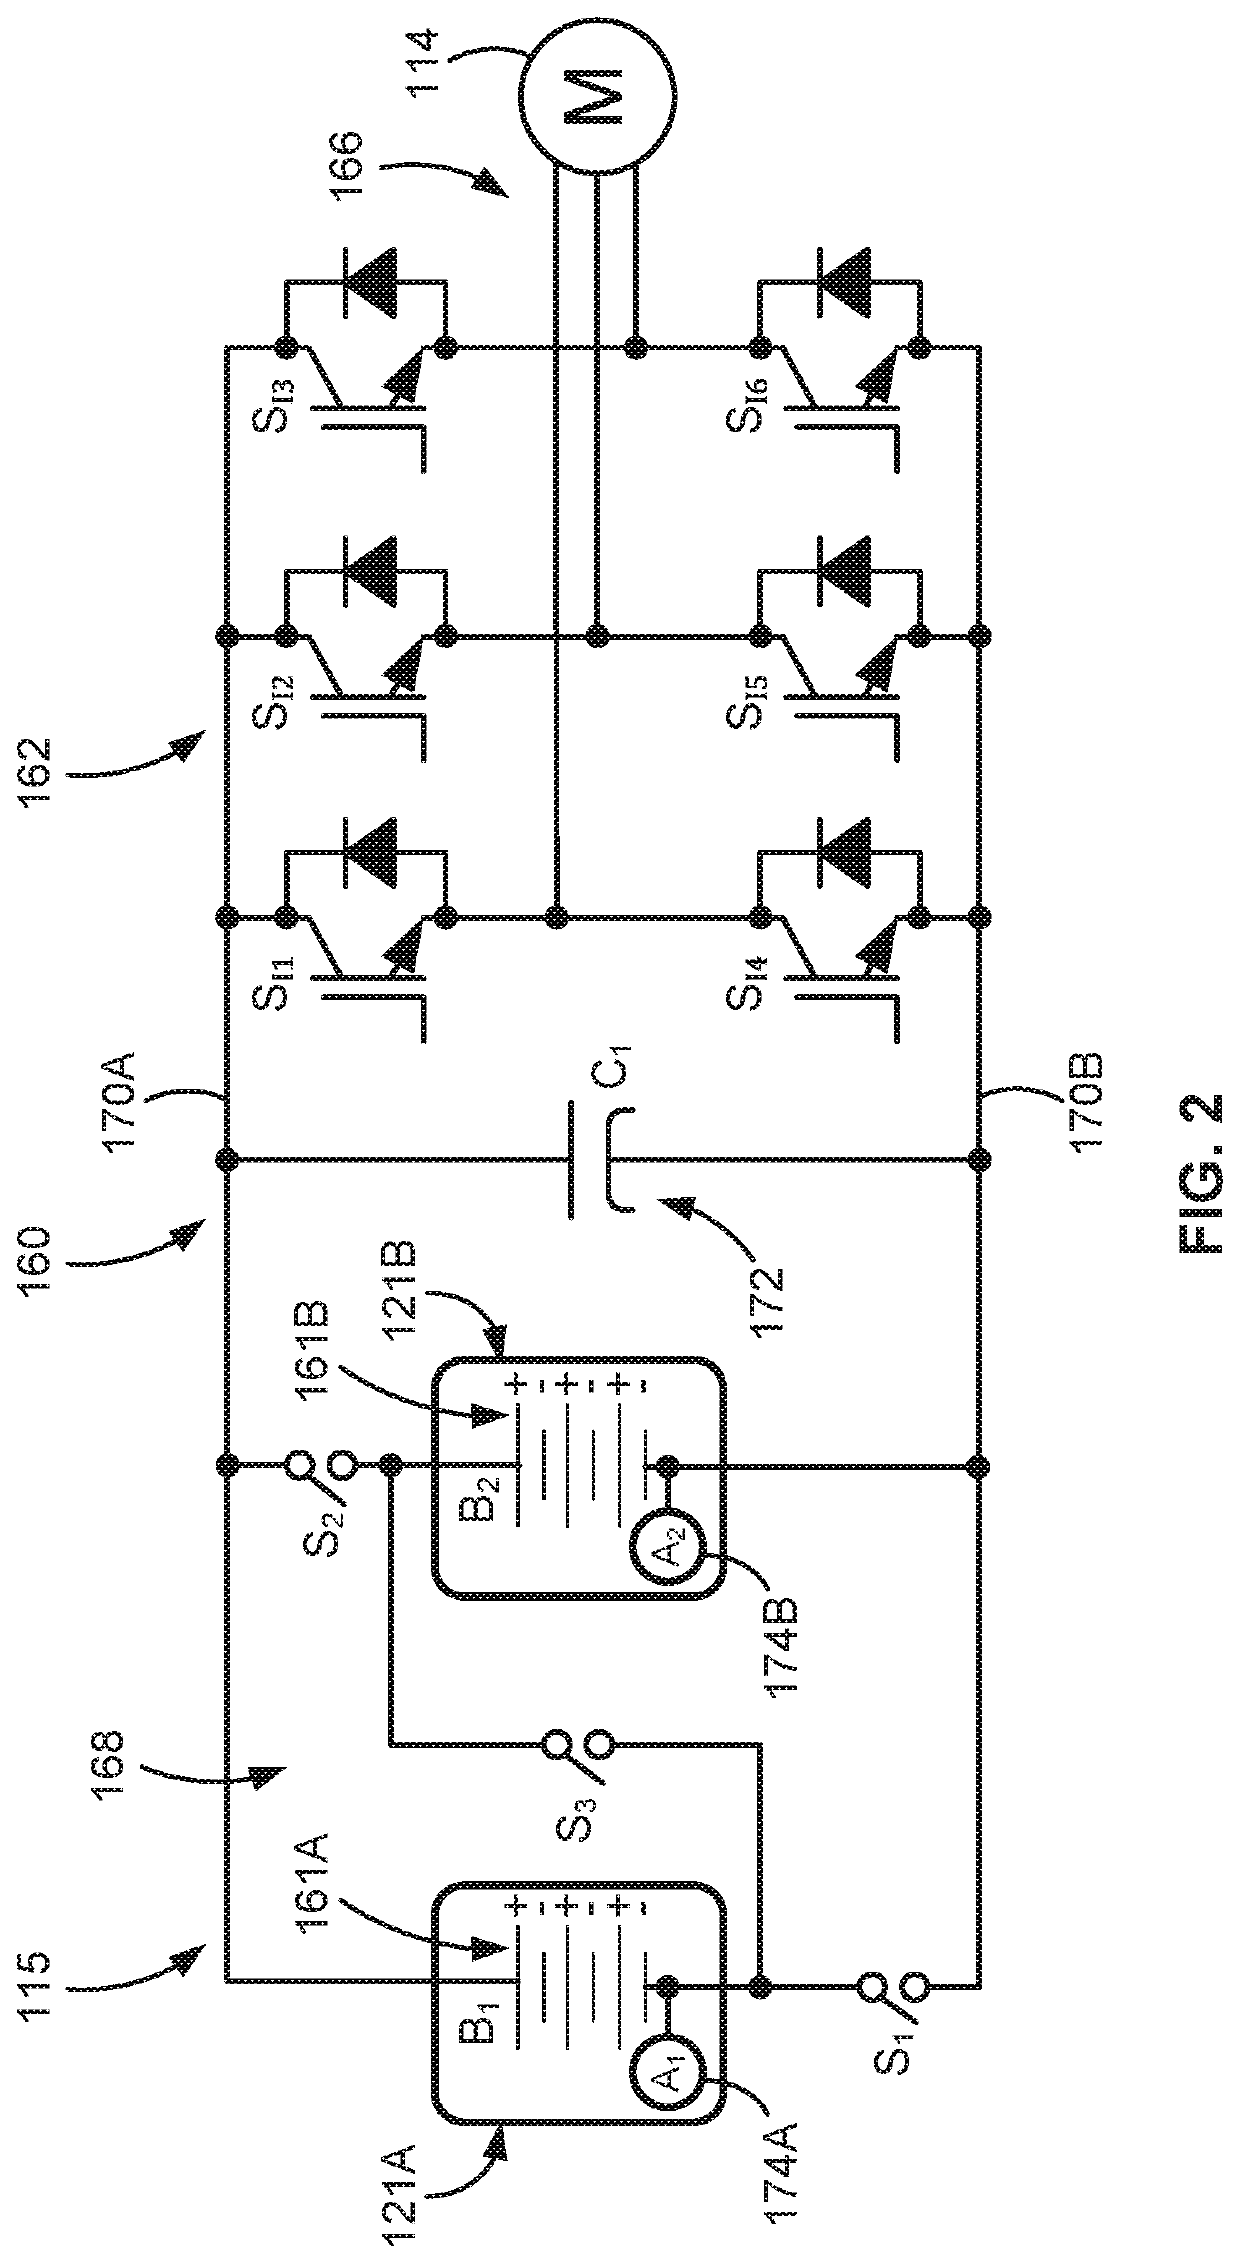 Electronic power module assemblies and control logic with direct-cooling vapor chamber systems